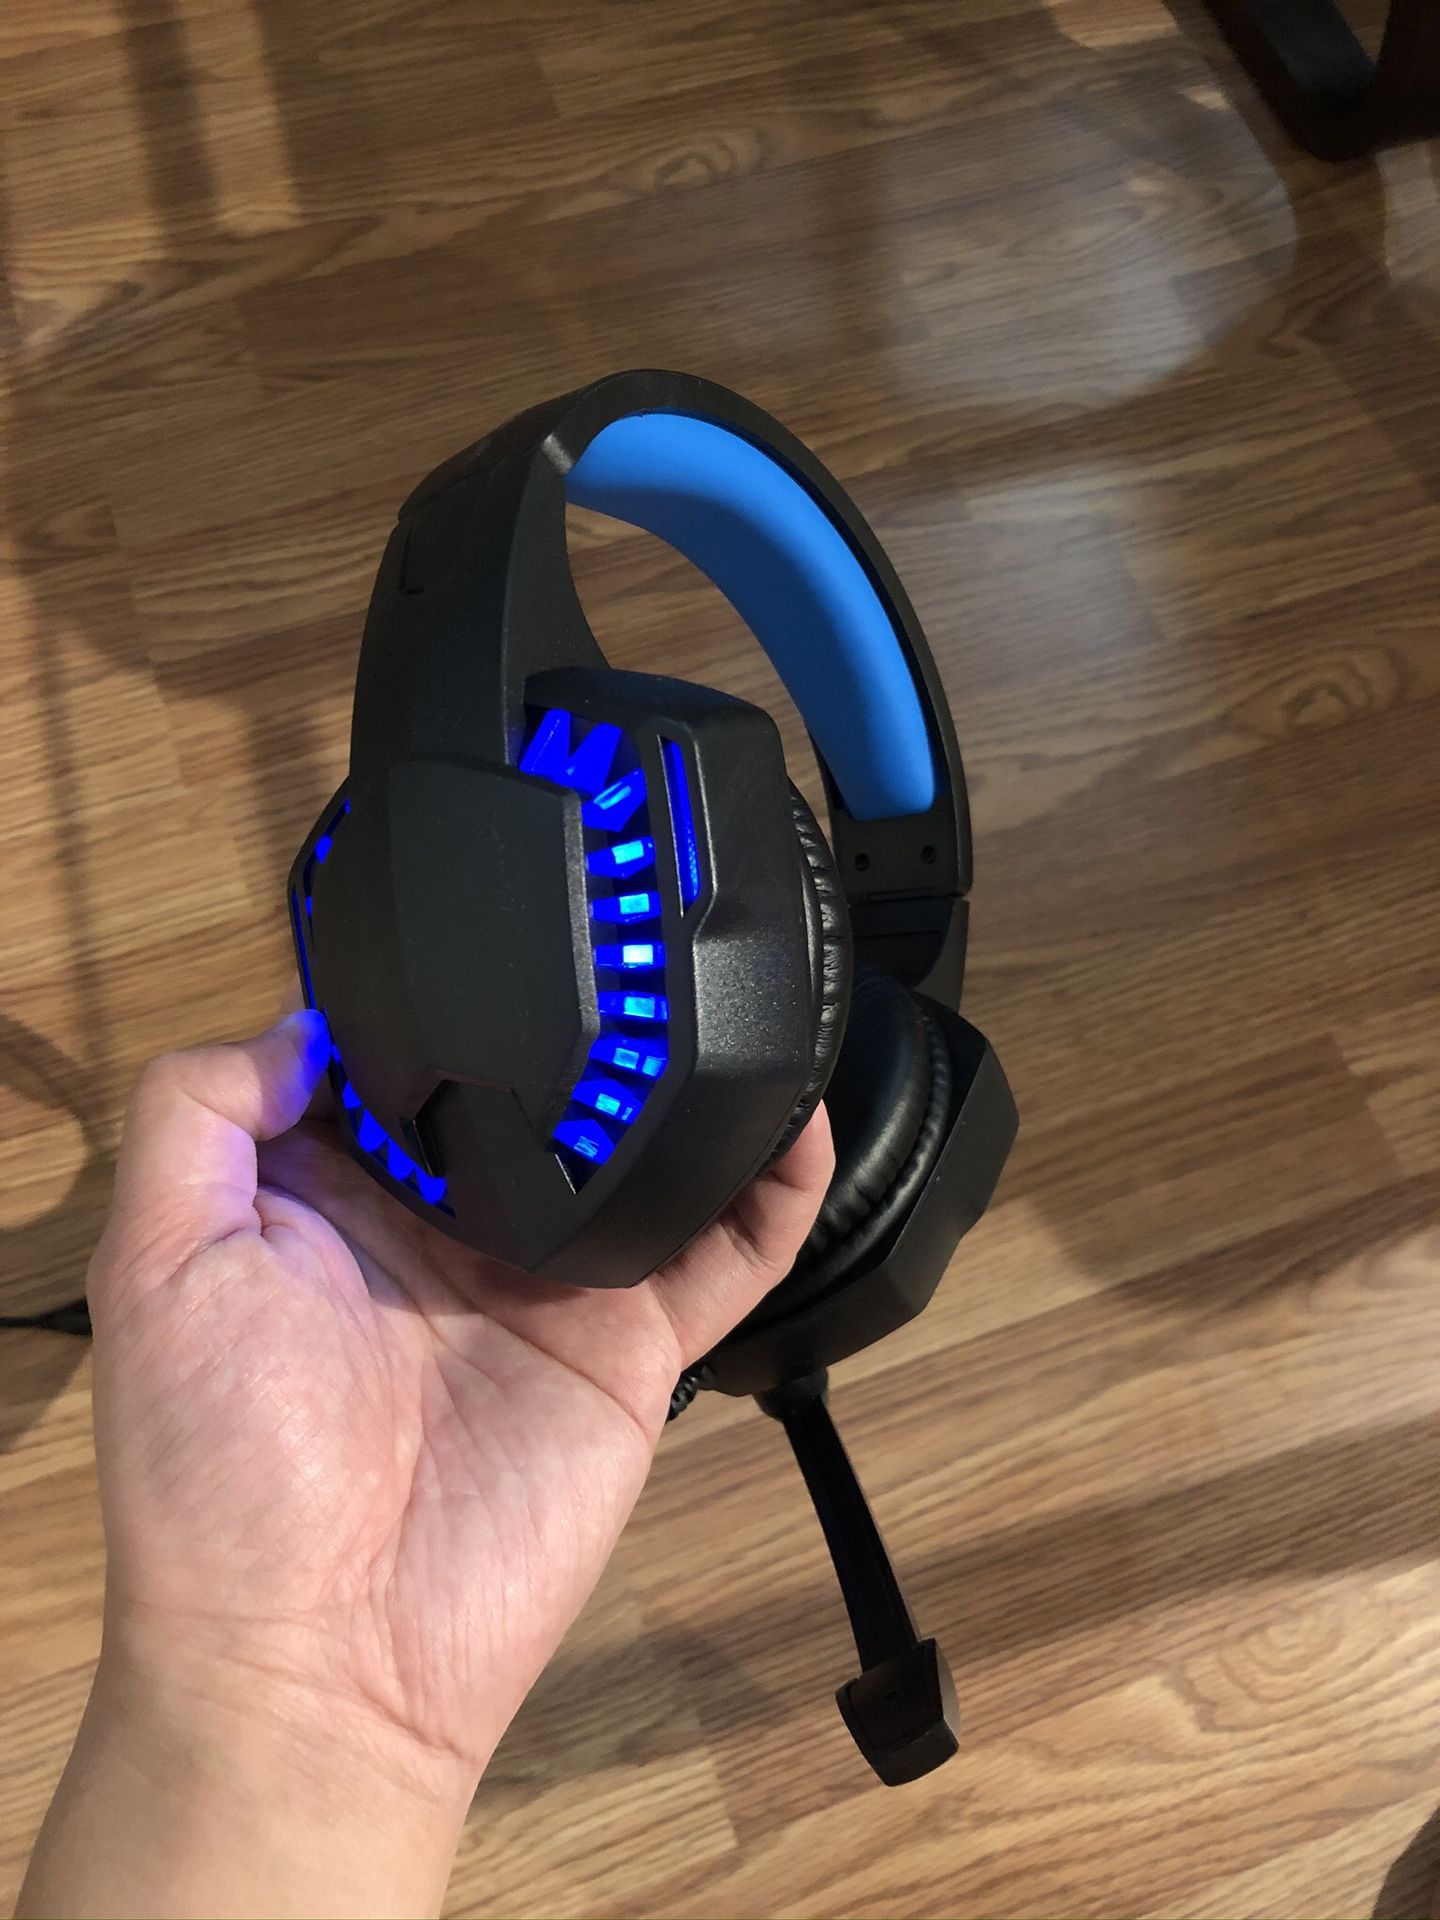 Brand New Gaming Headset for Fortnite PS4, PC, Xbox One Controller, Noise Cancelling Over Ear Headphones with Mic, LED Light, Bass Surround